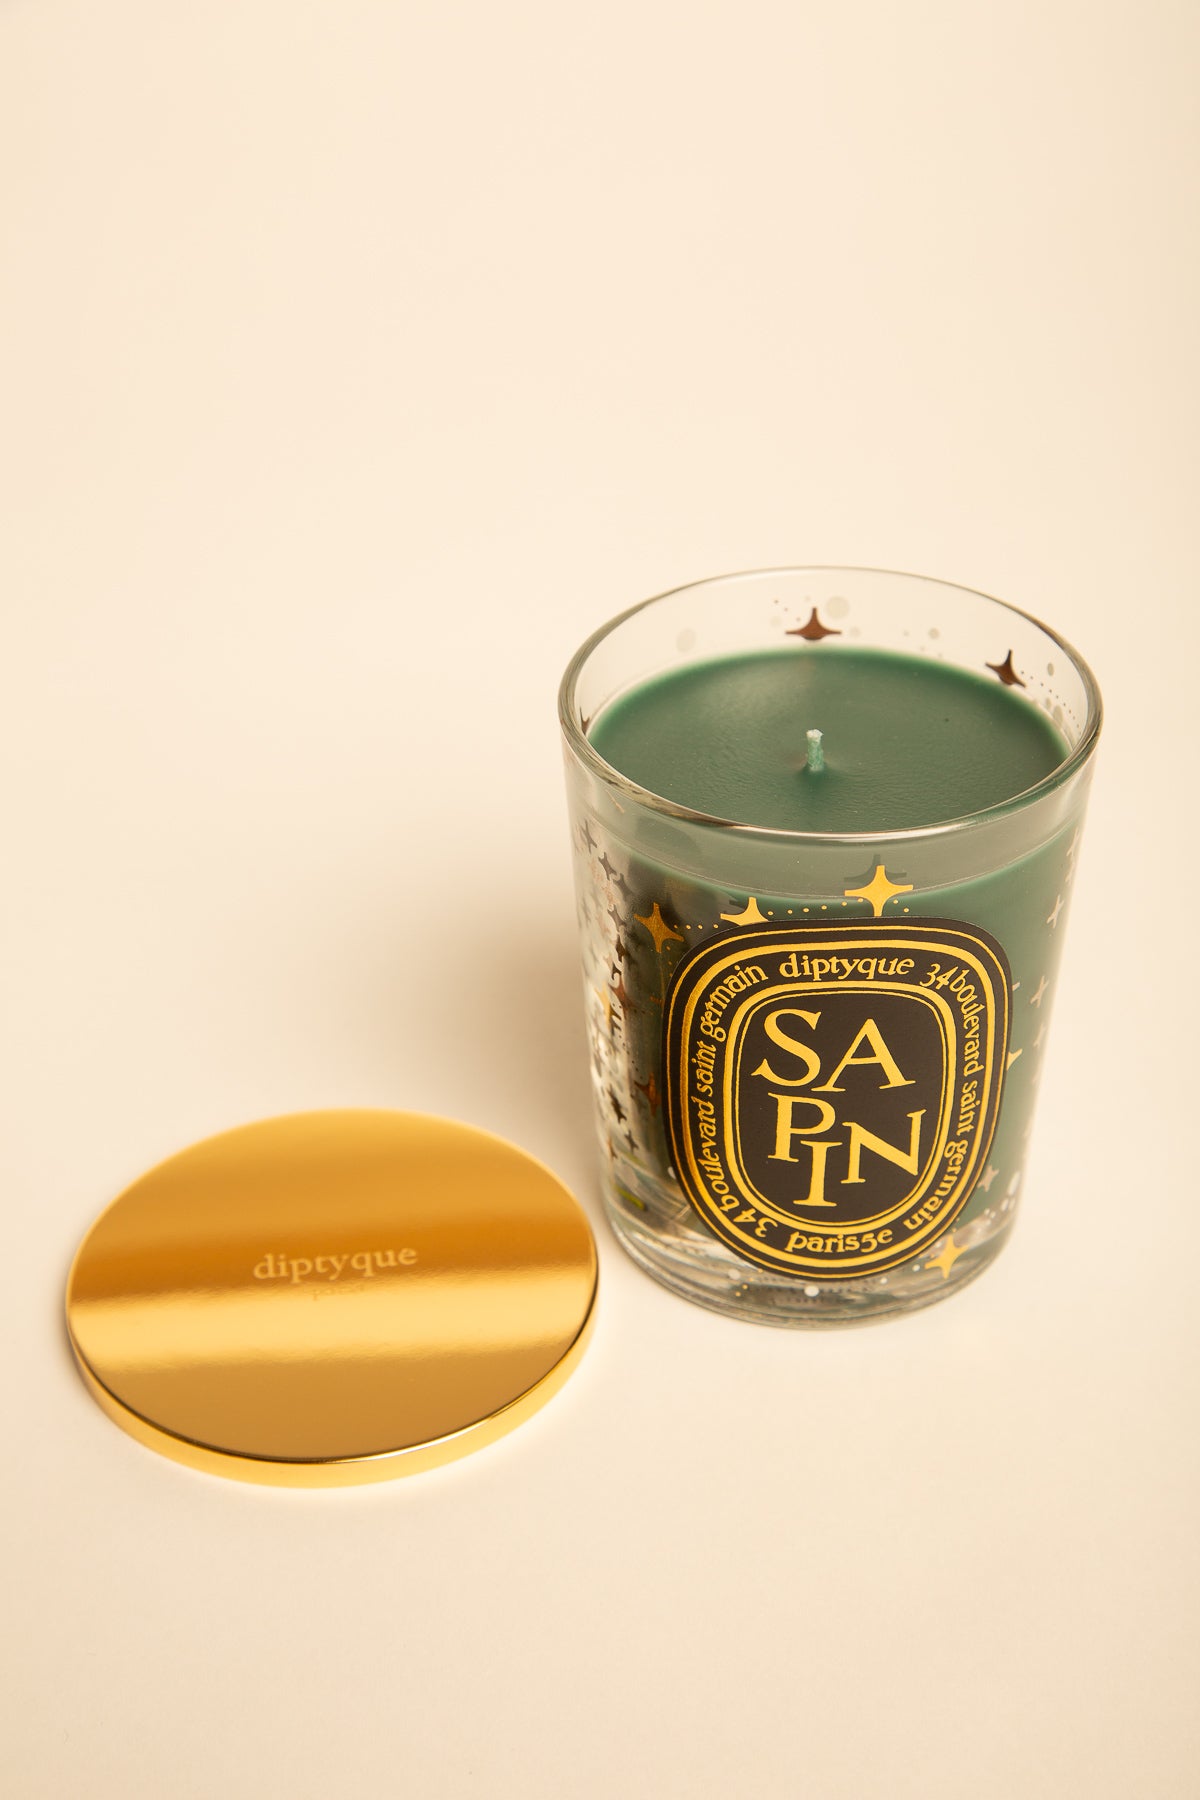 DIPTYQUE | SAPIN PINE TREE CANDLE